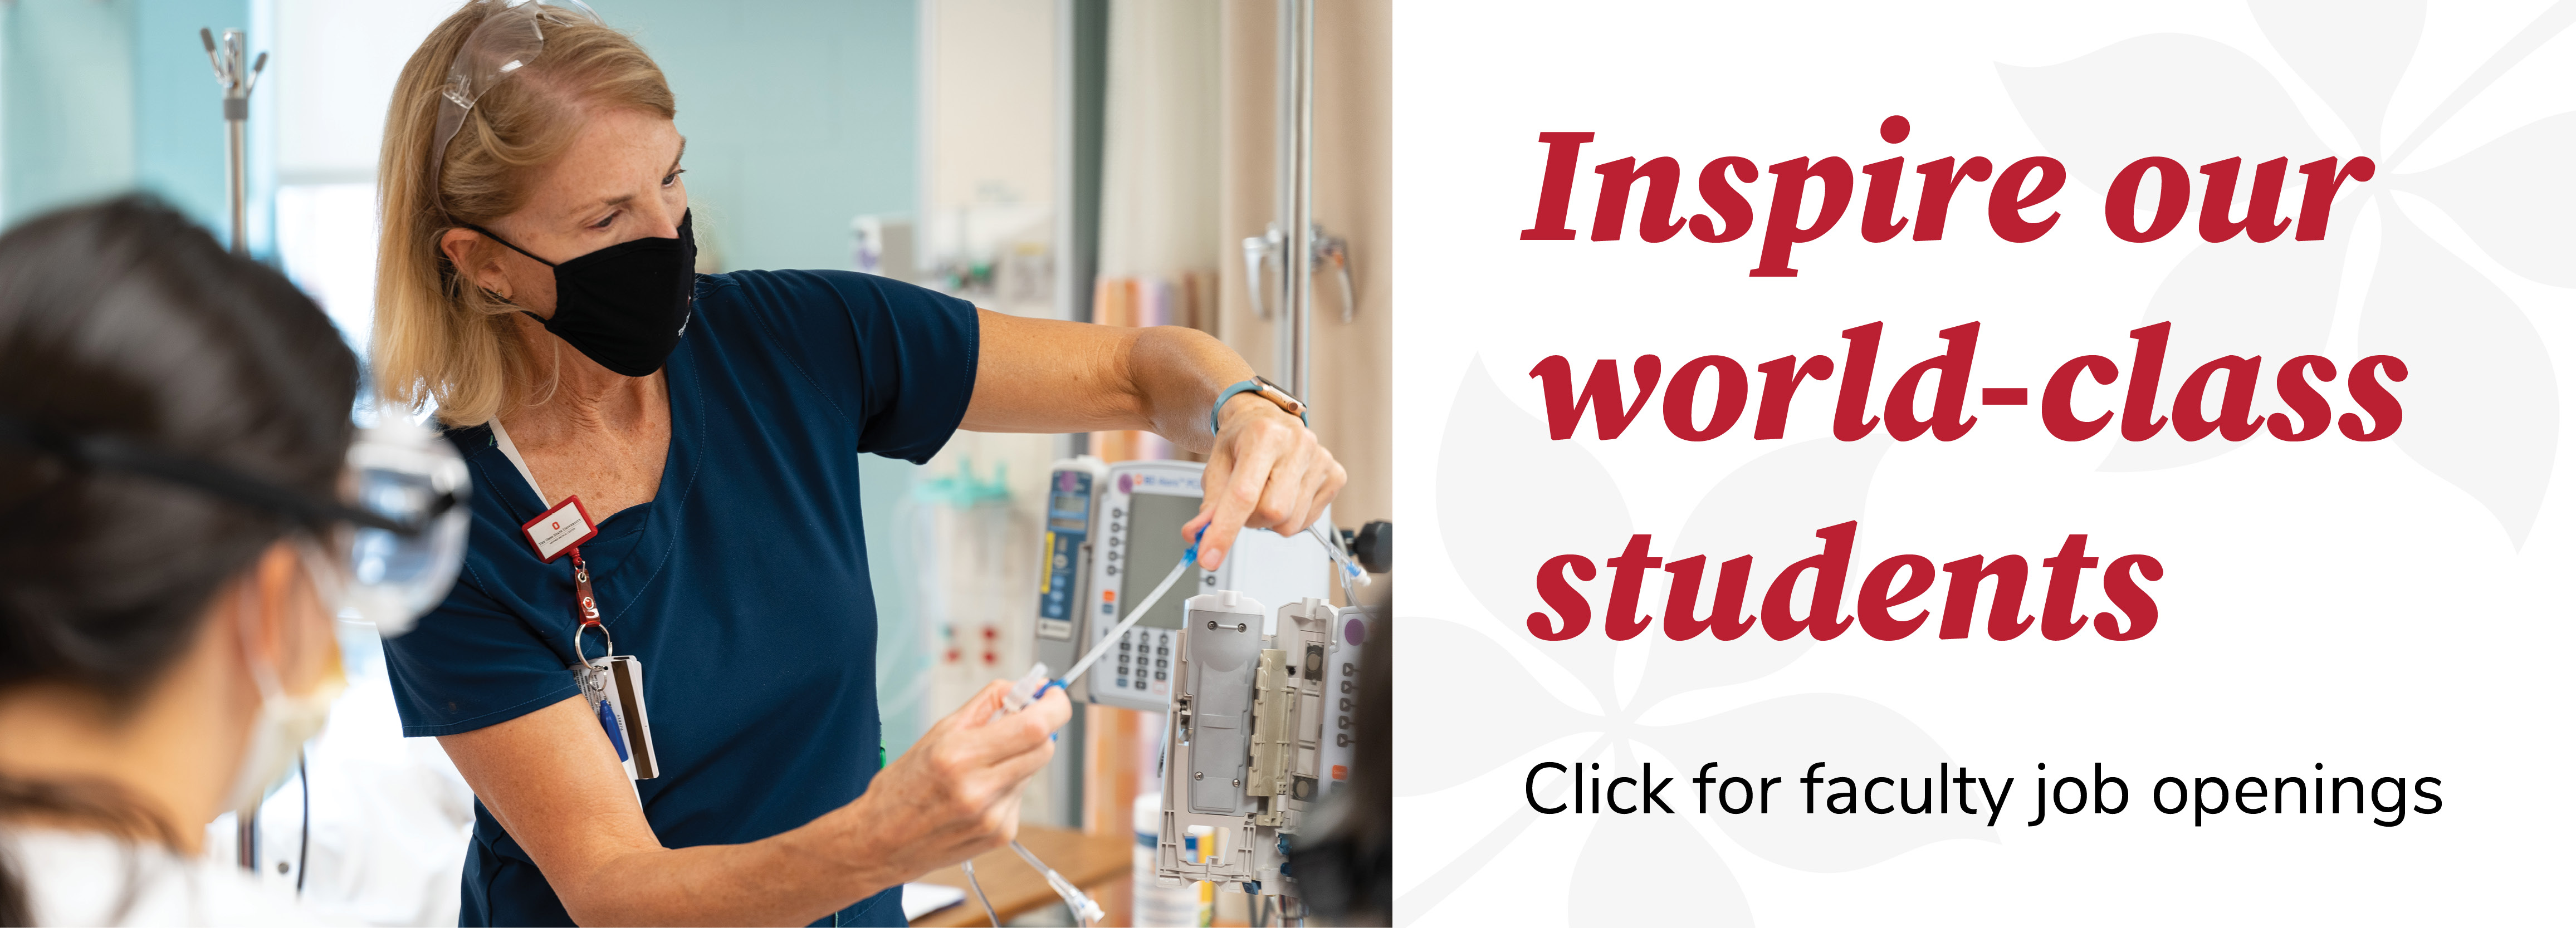 Inspire our world-class students - click here for faculty job postings